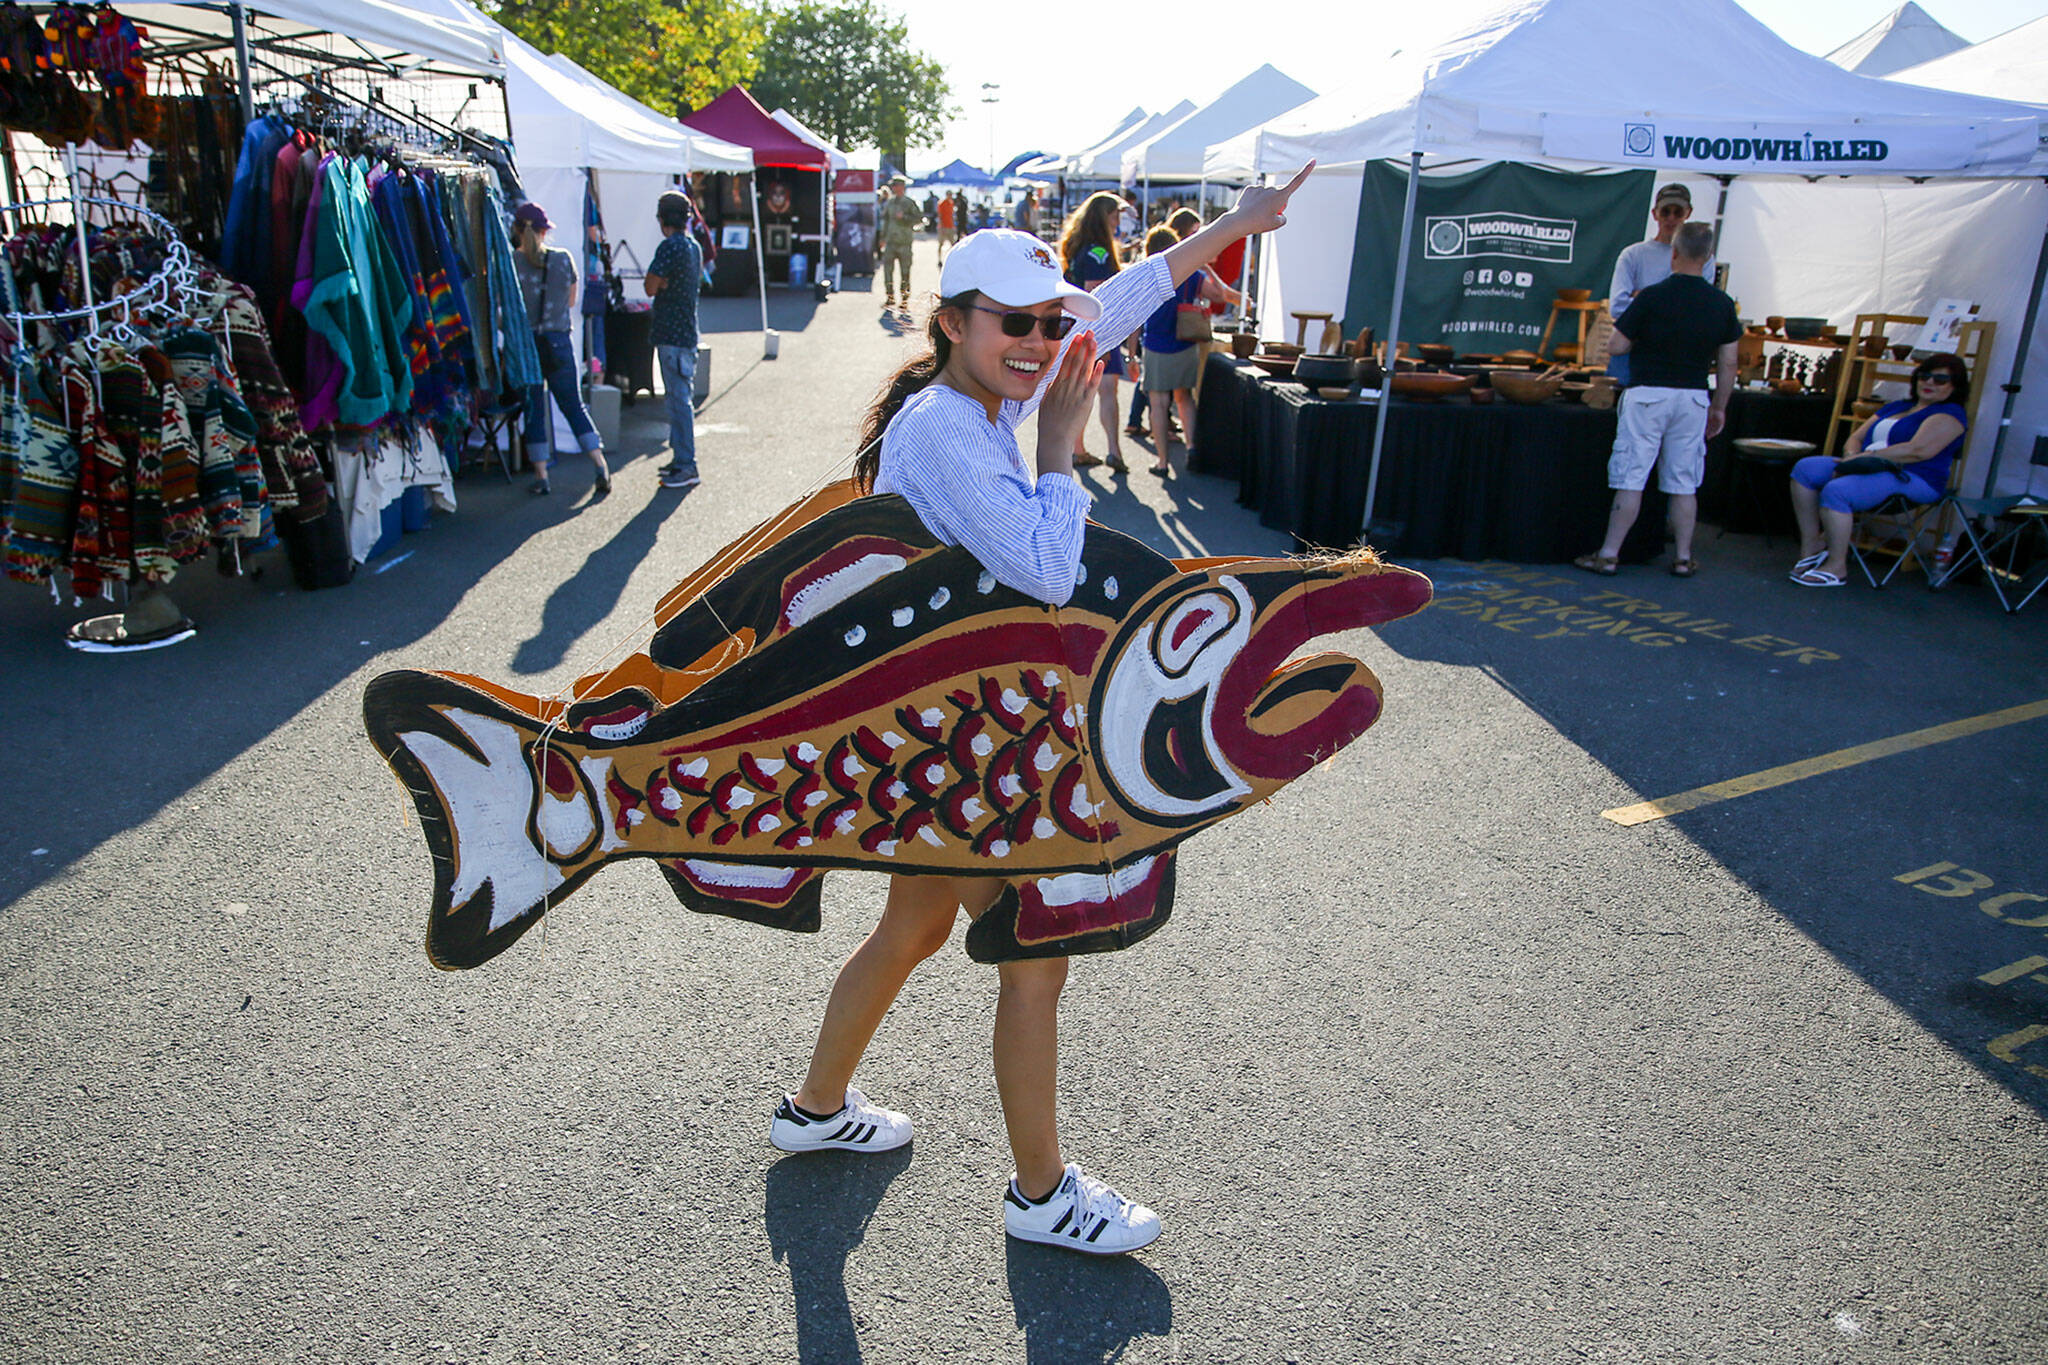 Alina Oeung walks the grounds shouting “free samples” for the Kiwanis Salmon Bake during the Mukilteo Lighthouse Festival in 2019. This year’s festival is Sept. 10-12 at Mukilteo Lighthouse Park. (Kevin Clark / Herald file)